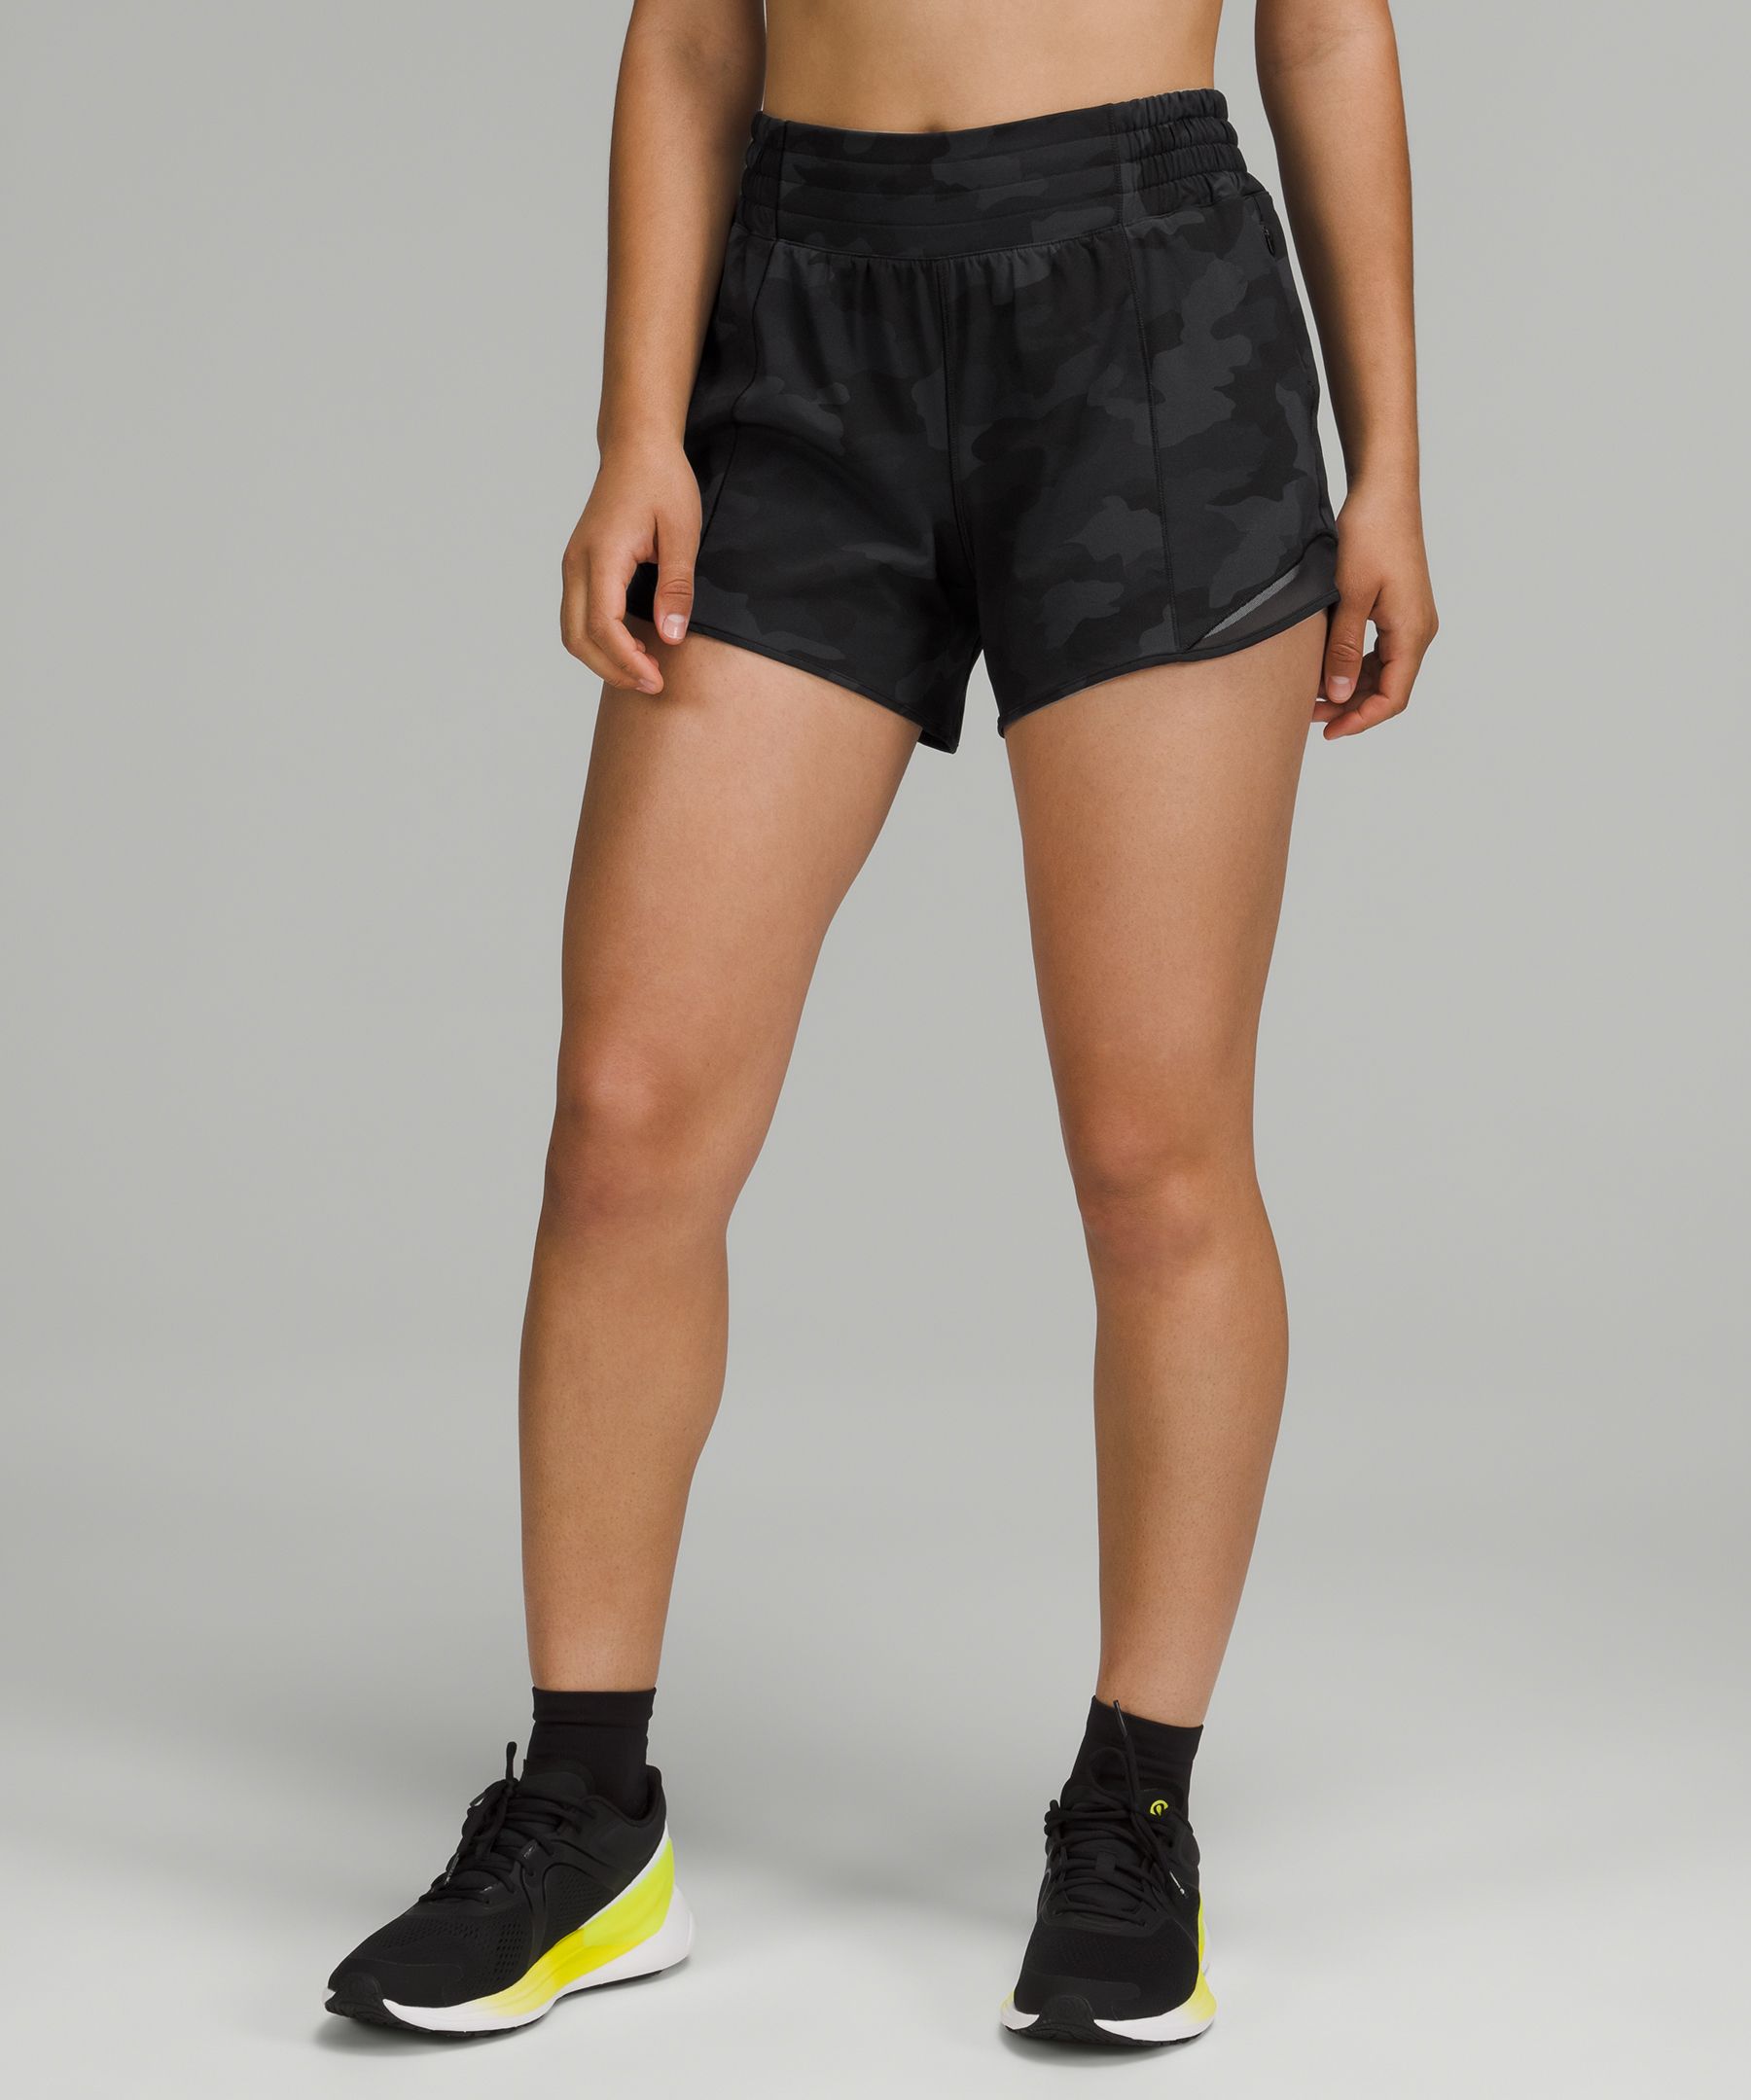 Lululemon Hotty Hot High-rise Lined Shorts 4" In Heritage 365 Camo Deep Coal /black